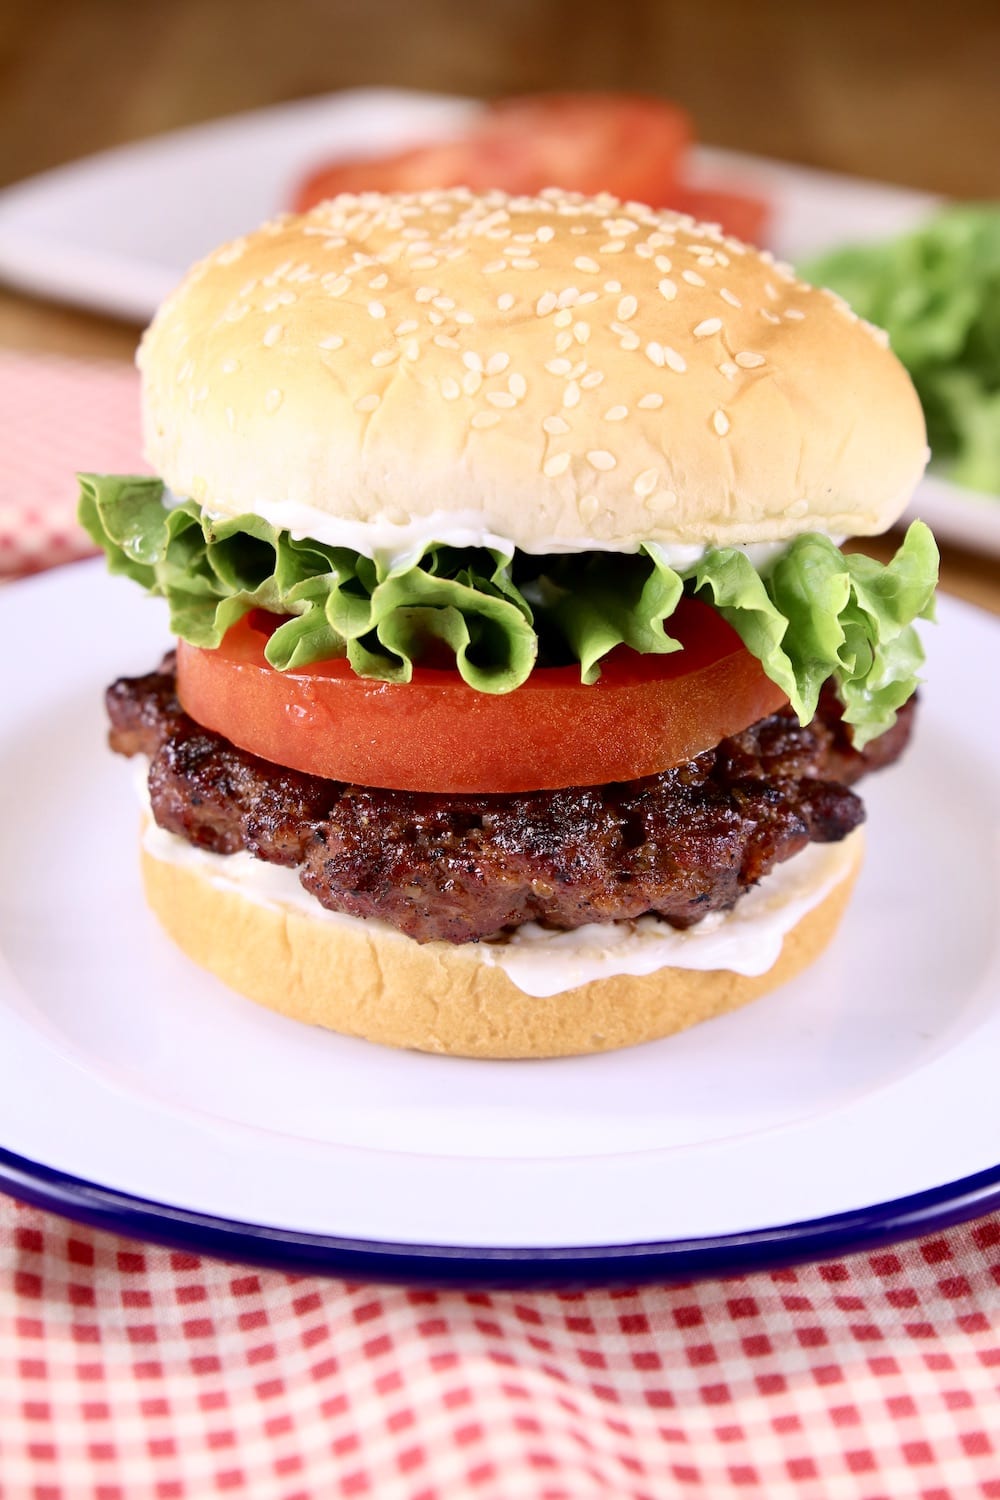 brisket burger with lettuce and tomato - close up view